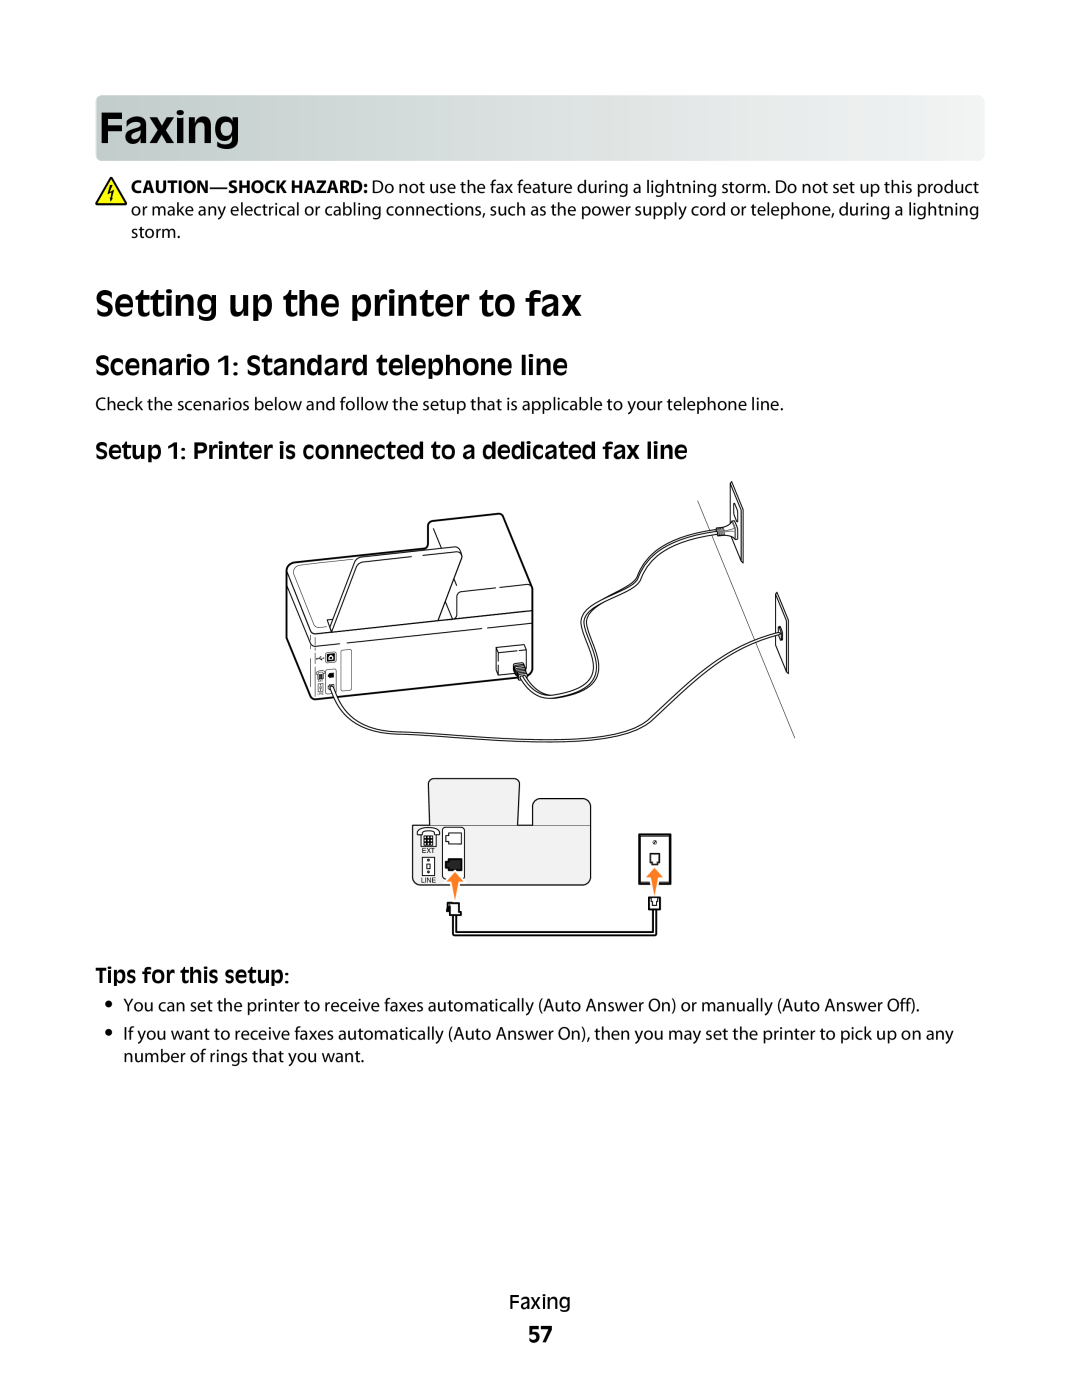 Dell V515W manual Faxing, Setting up the printer to fax, Scenario 1 Standard telephone line, Tips for this setup 